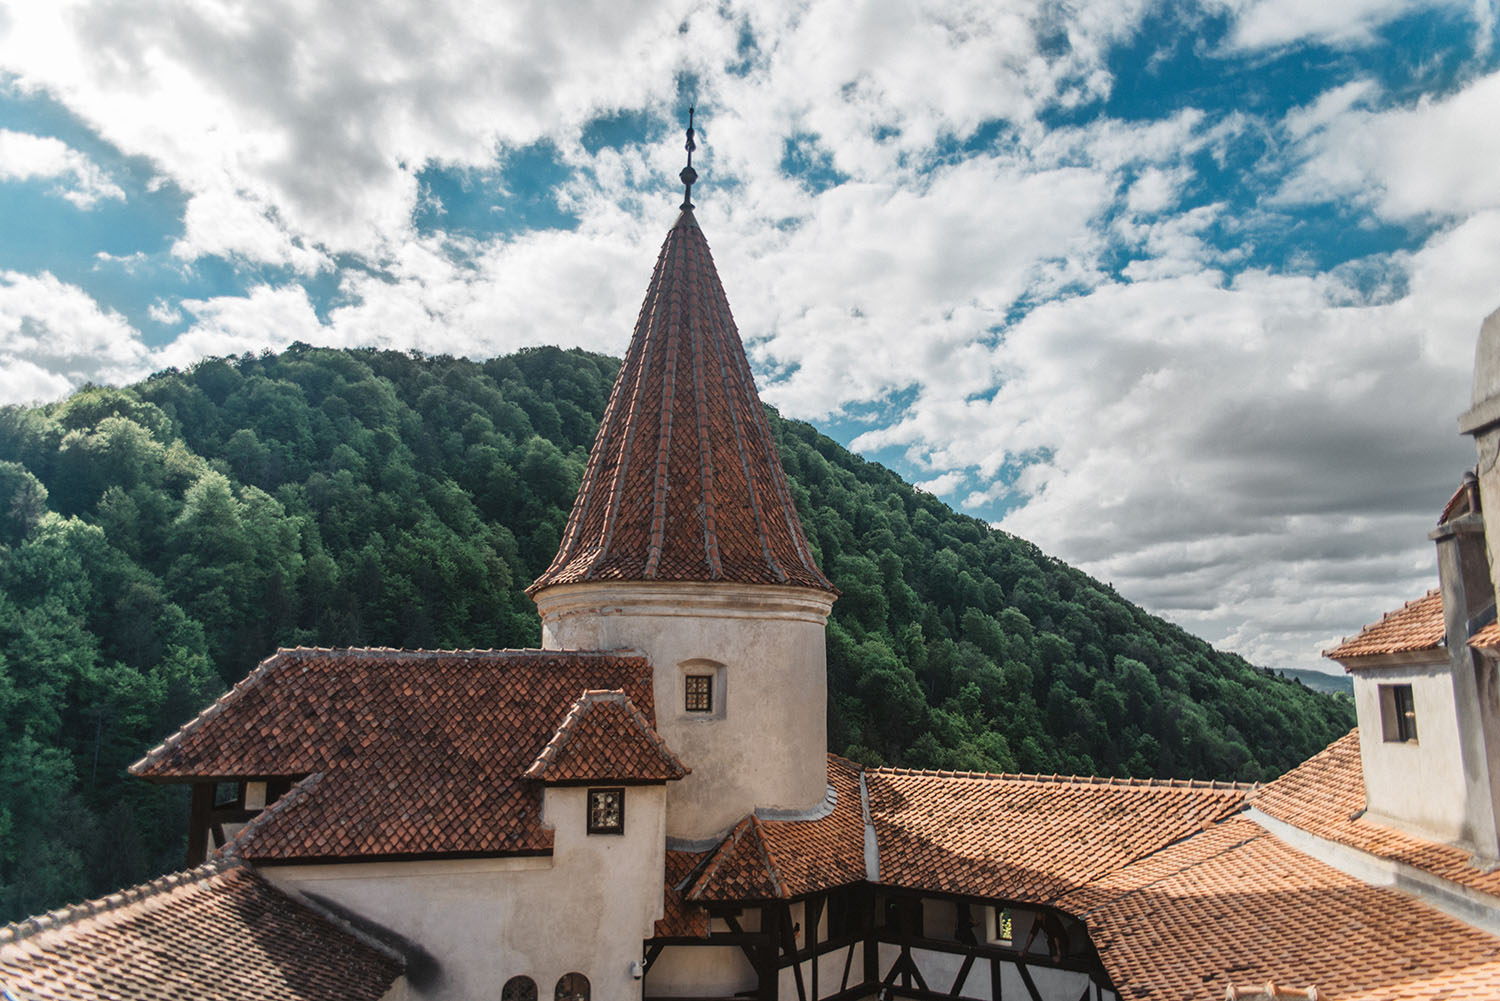 From Bucharest to Dracula's Castle in Transylvania (Bran Castle)